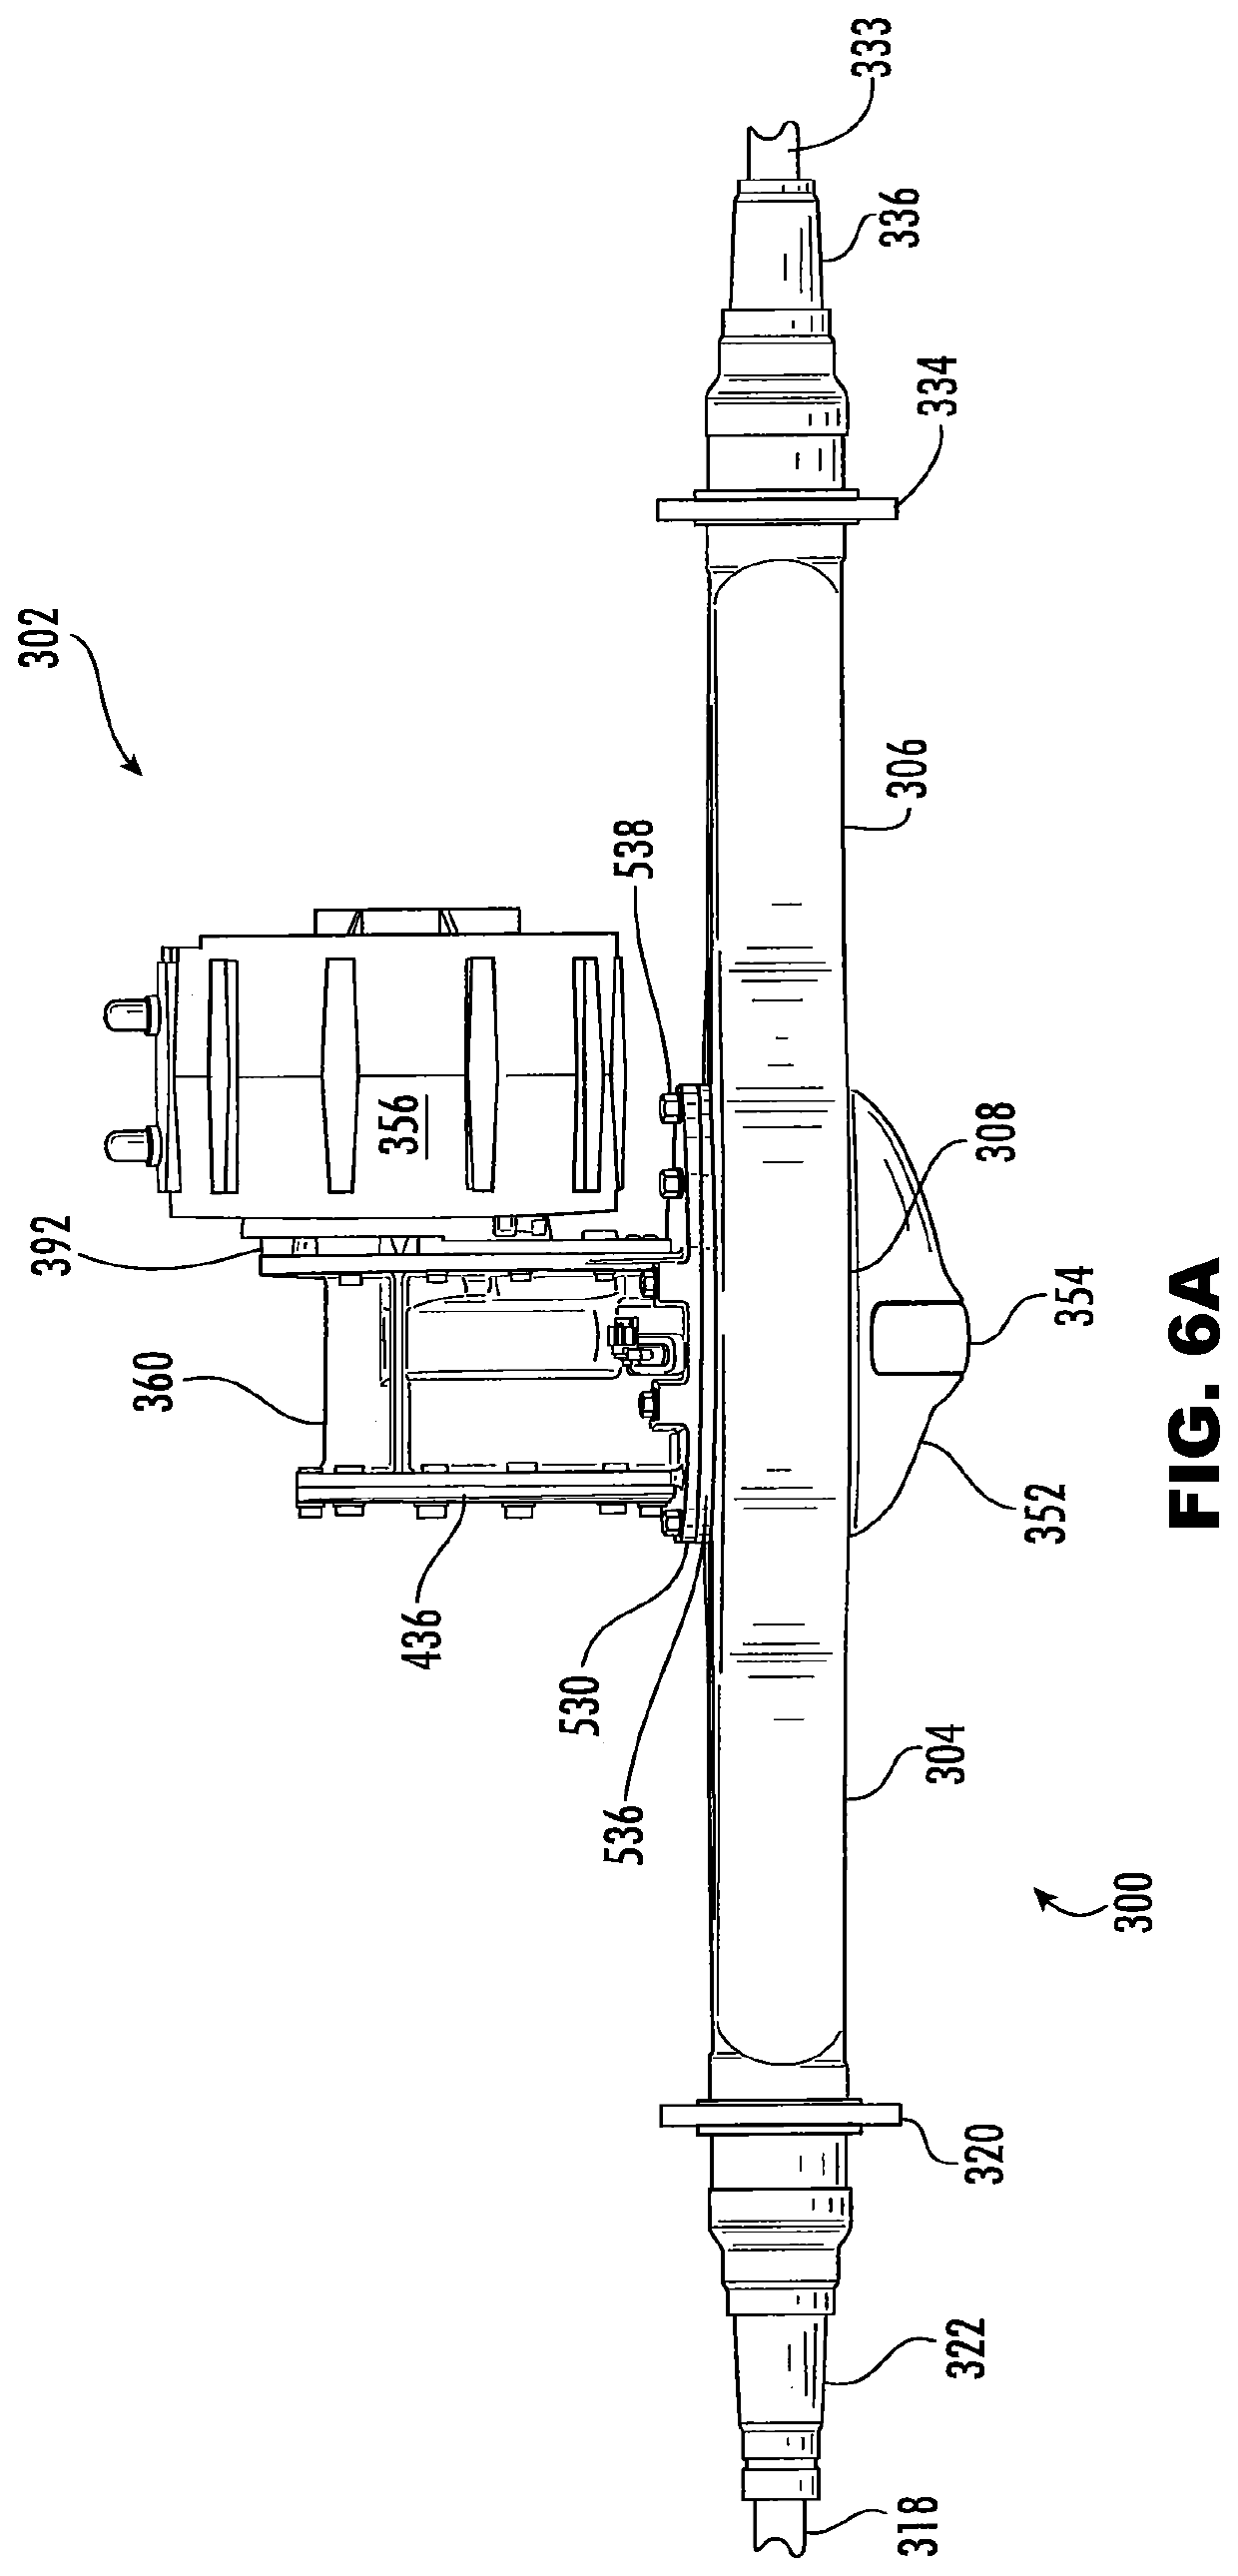 Modular head assembly for an electric axle